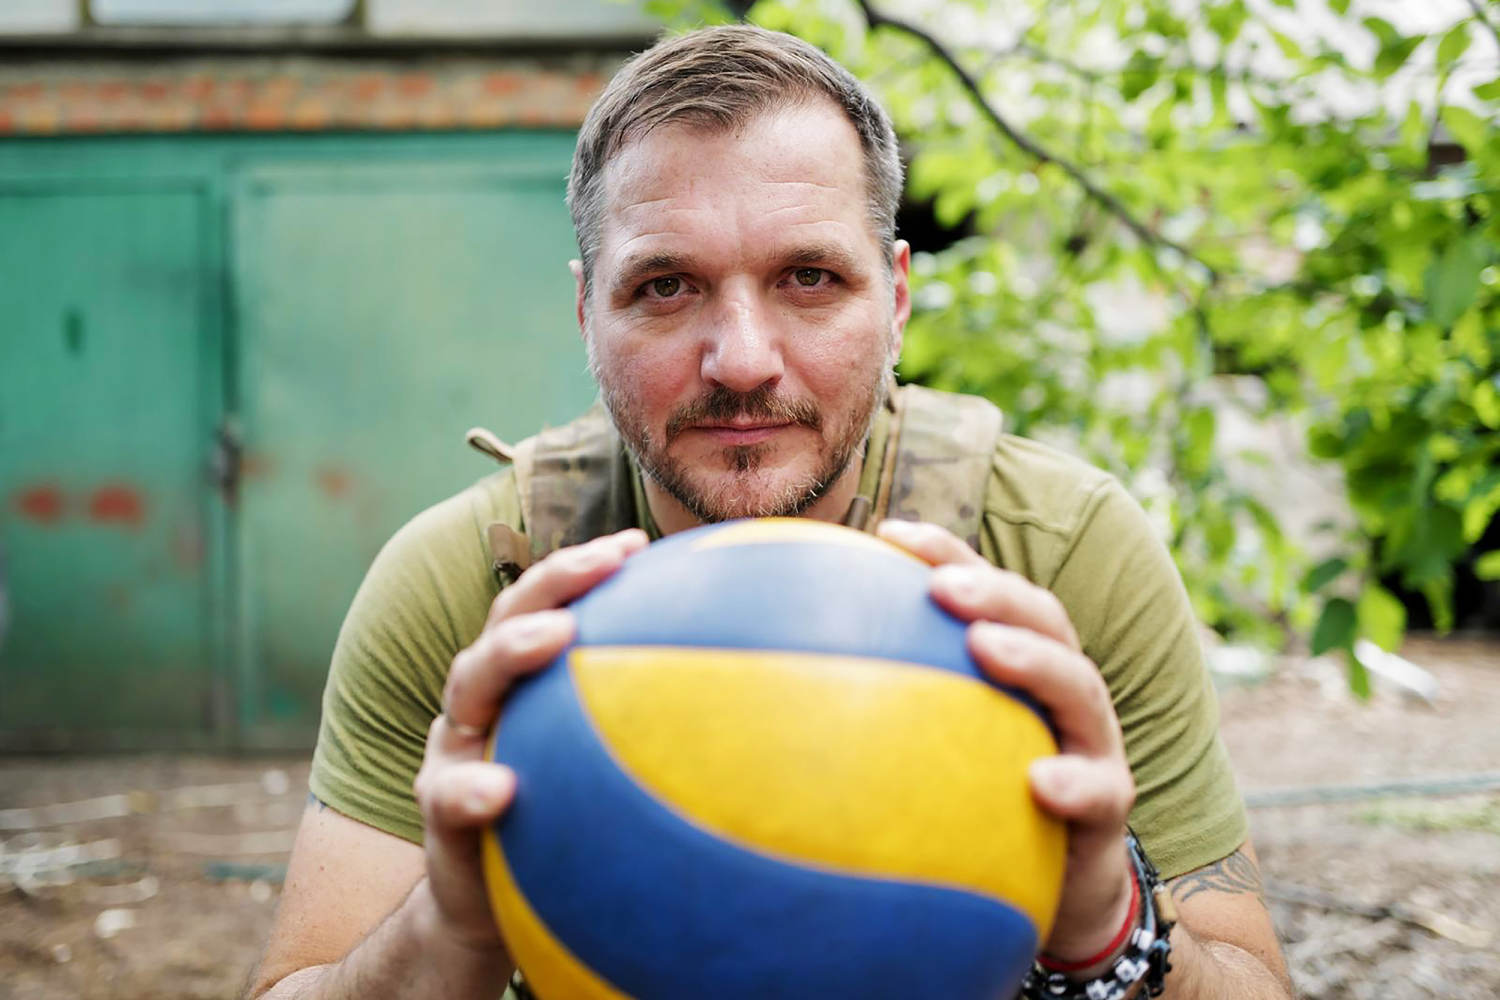 Ukrainian Paralympian practices his volleyball spike when he's not flying drones over Russian troops